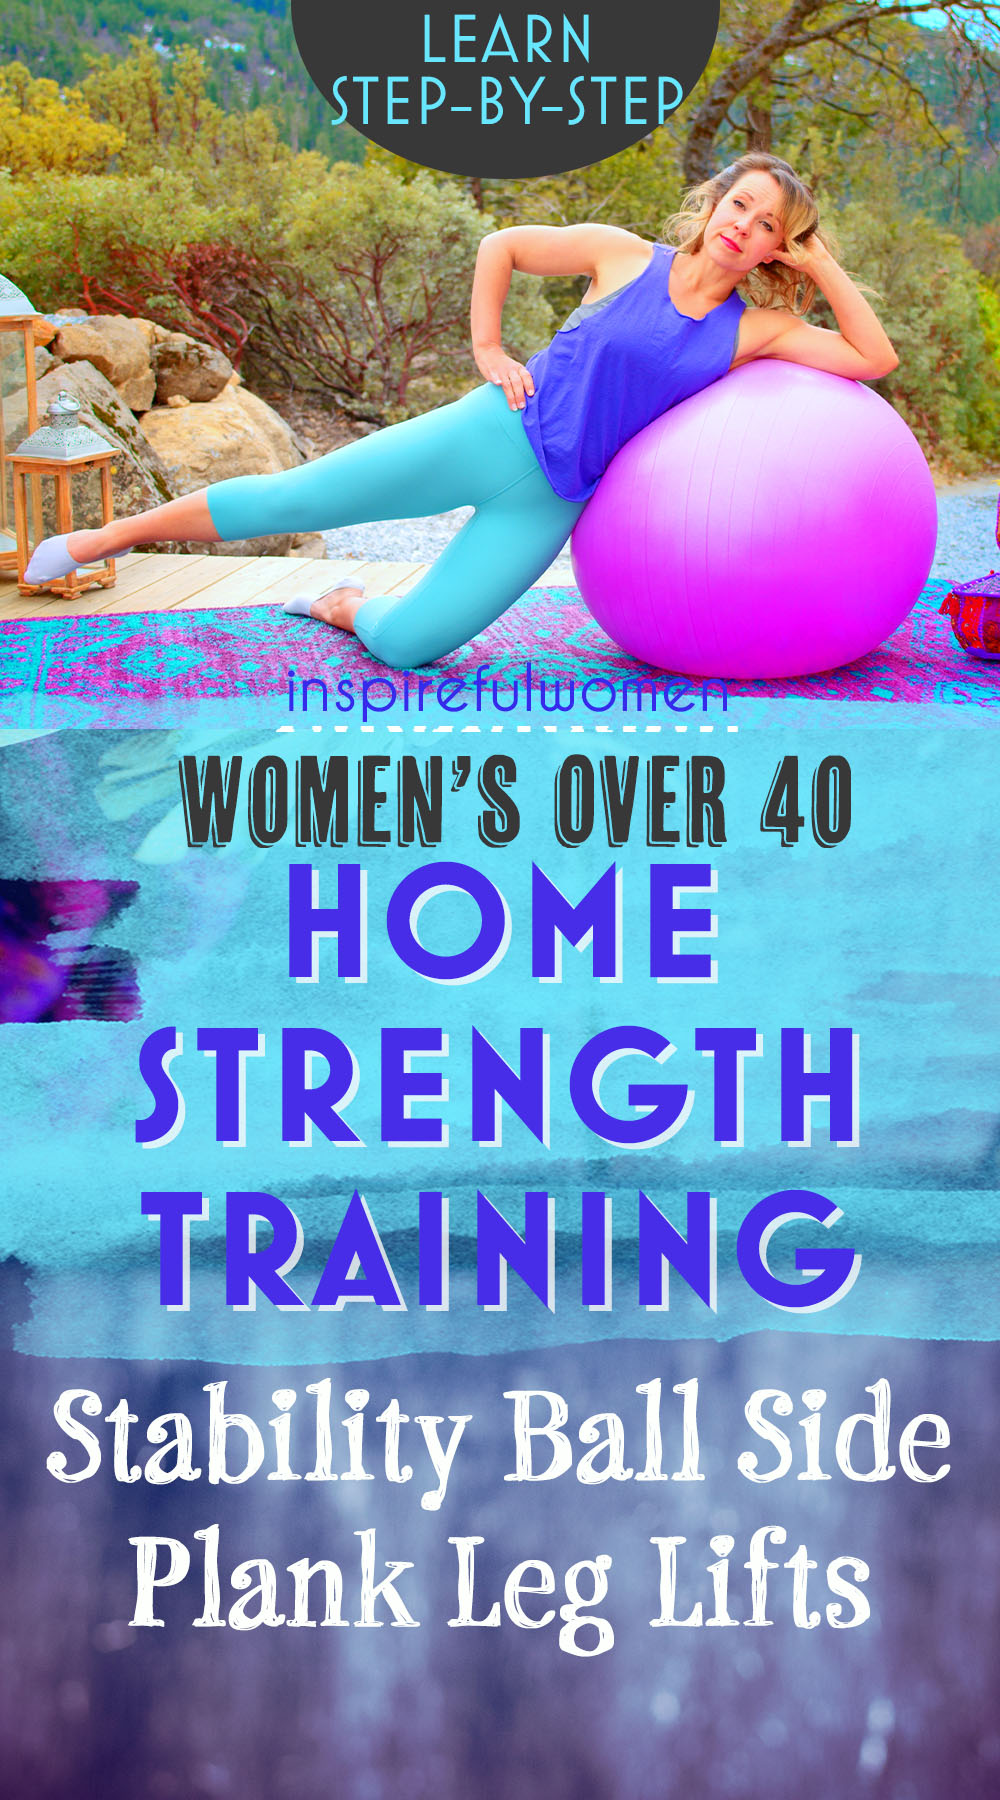 stability-ball-side-leg-raises-glutes-workout-at-home-women-over-40